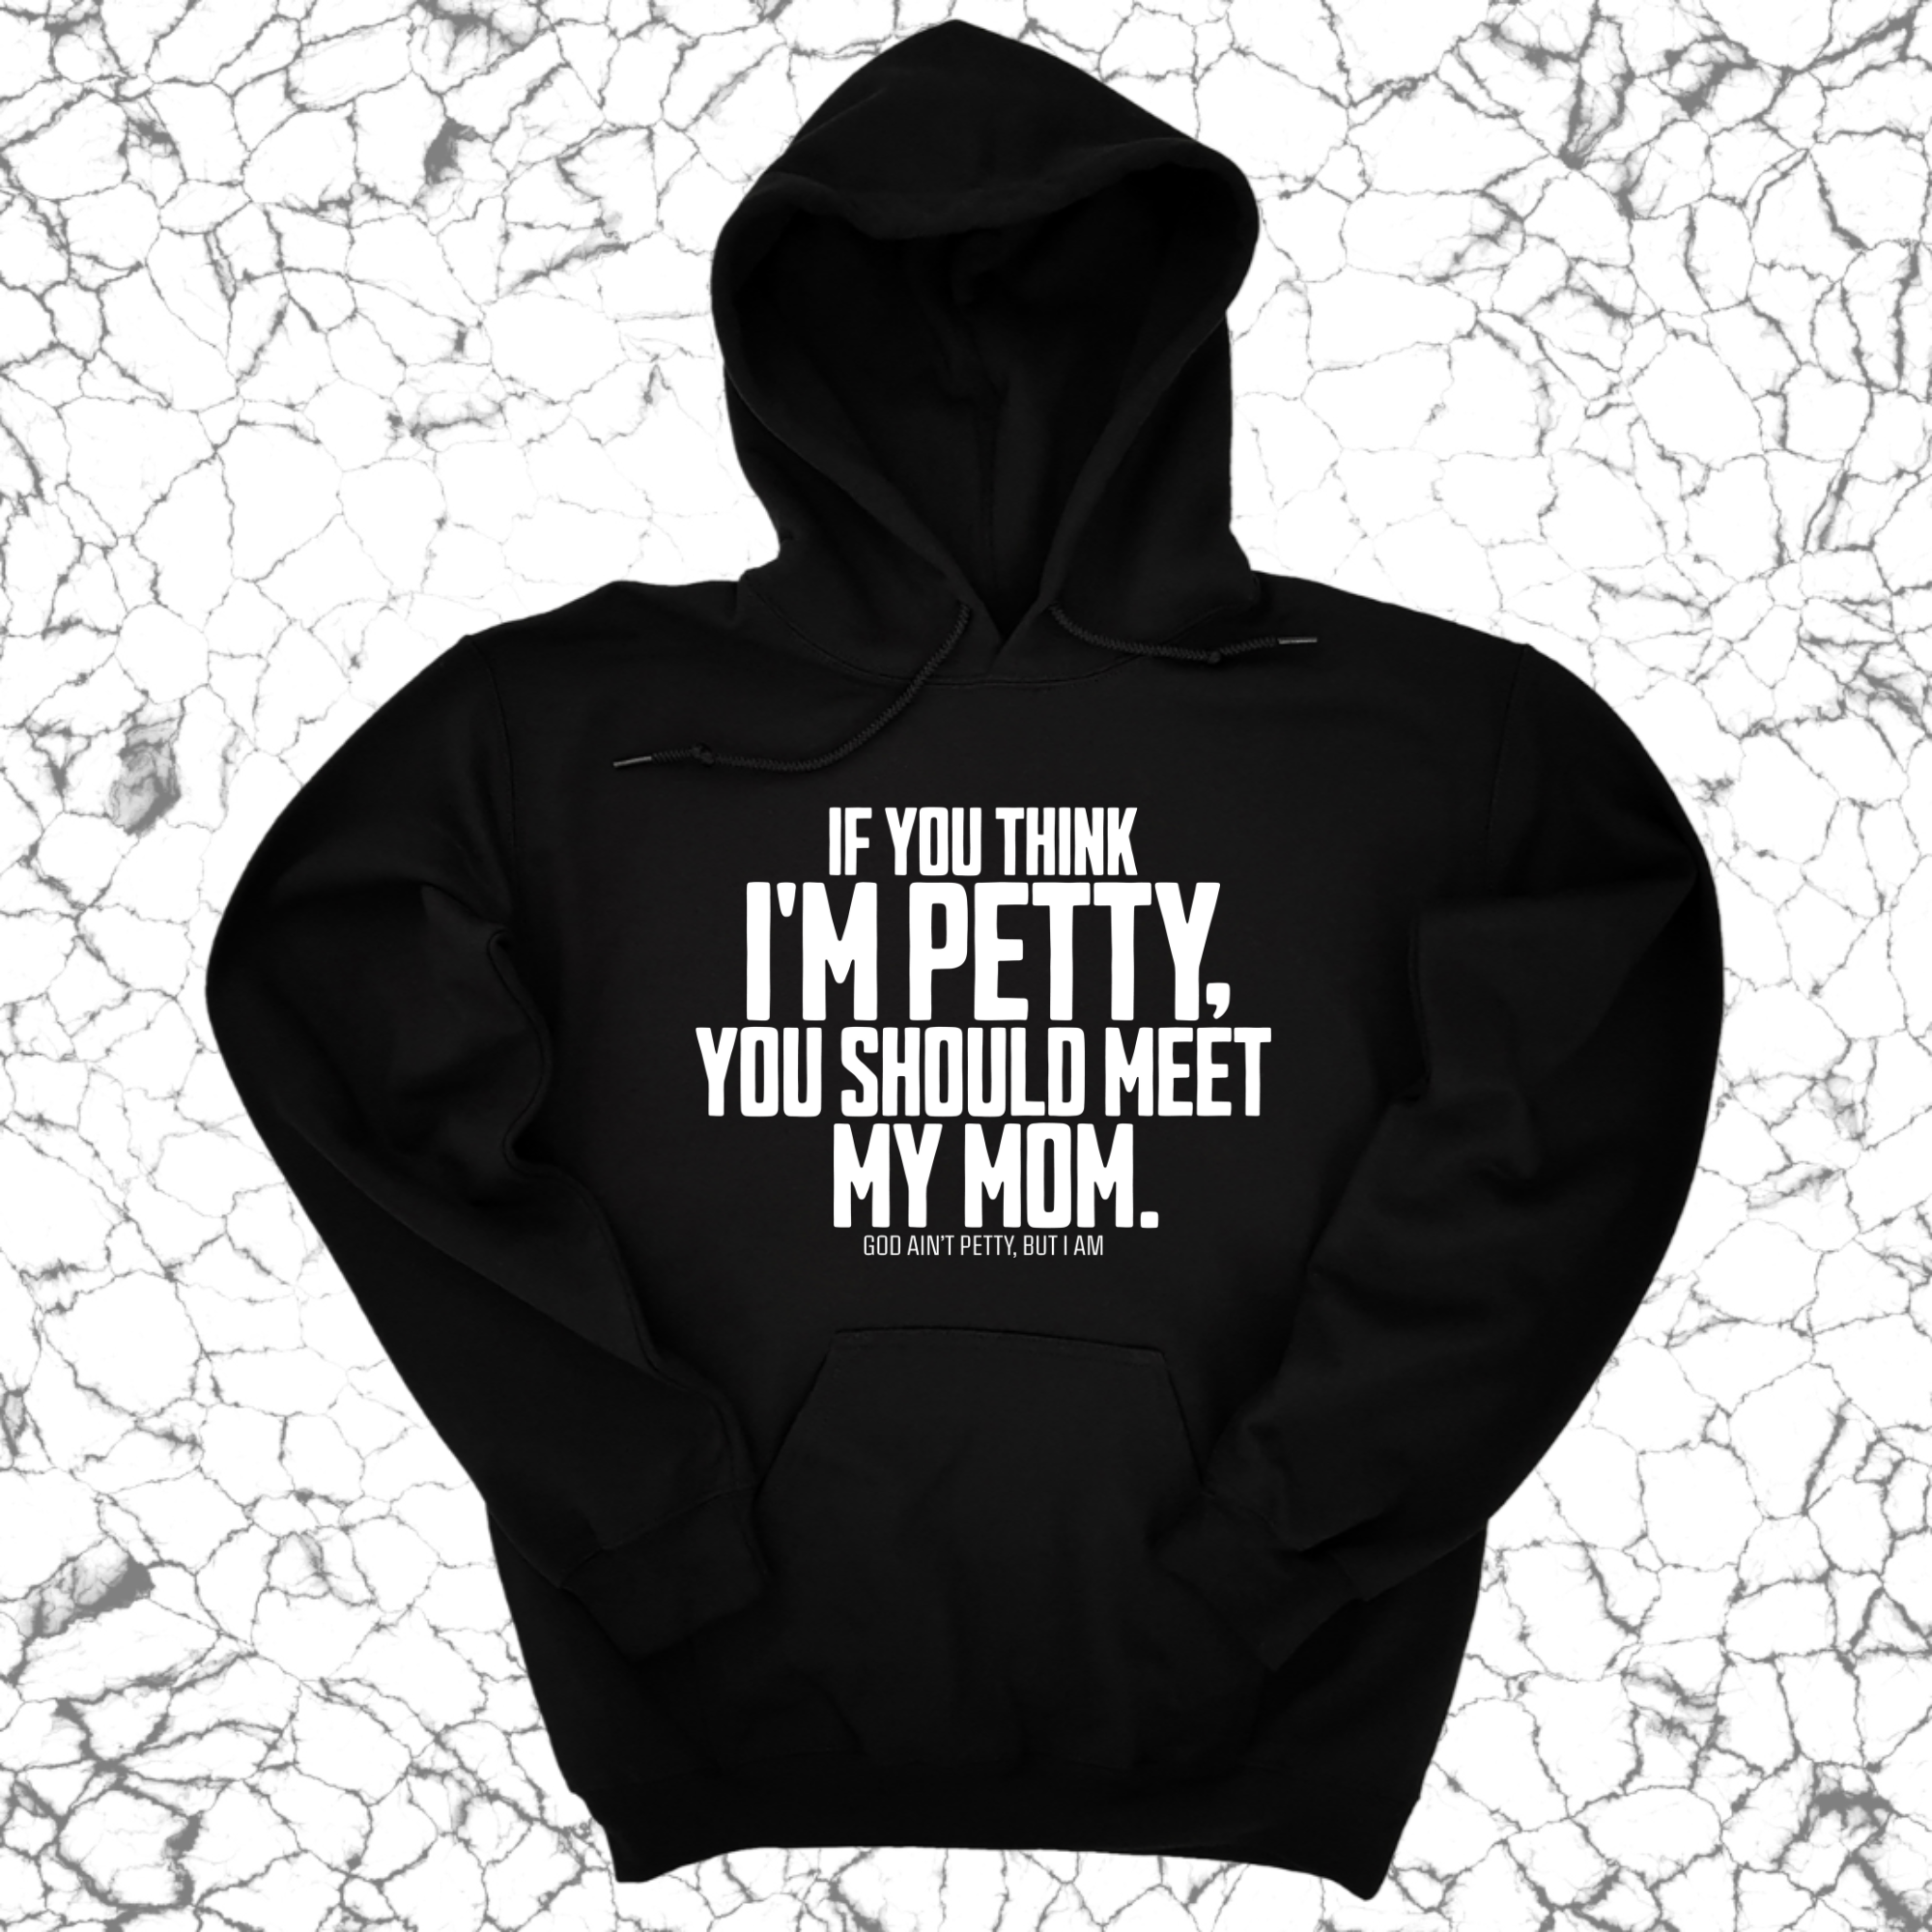 If you think I'm Petty, you should meet my Mom Unisex Hoodie-Hoodie-The Original God Ain't Petty But I Am